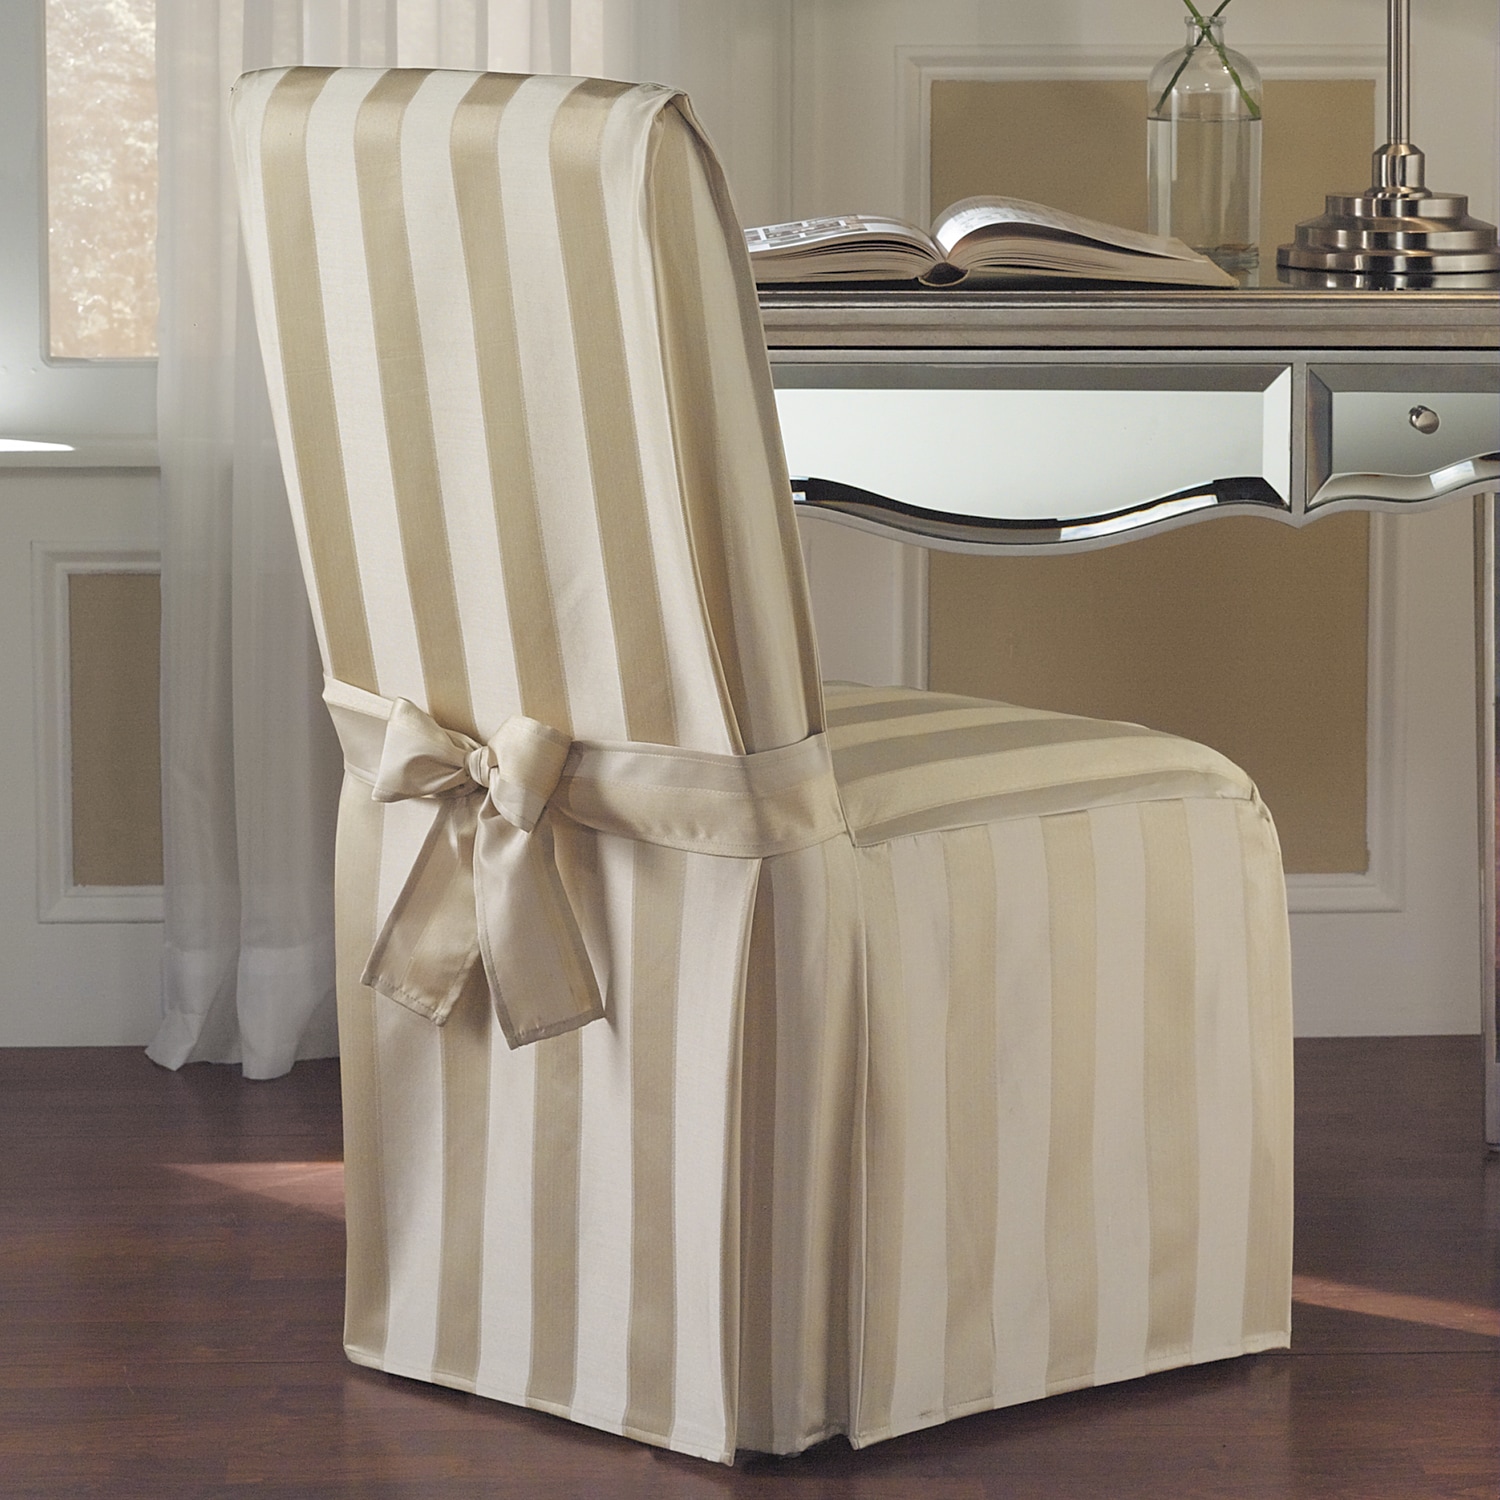 decorative chair covers